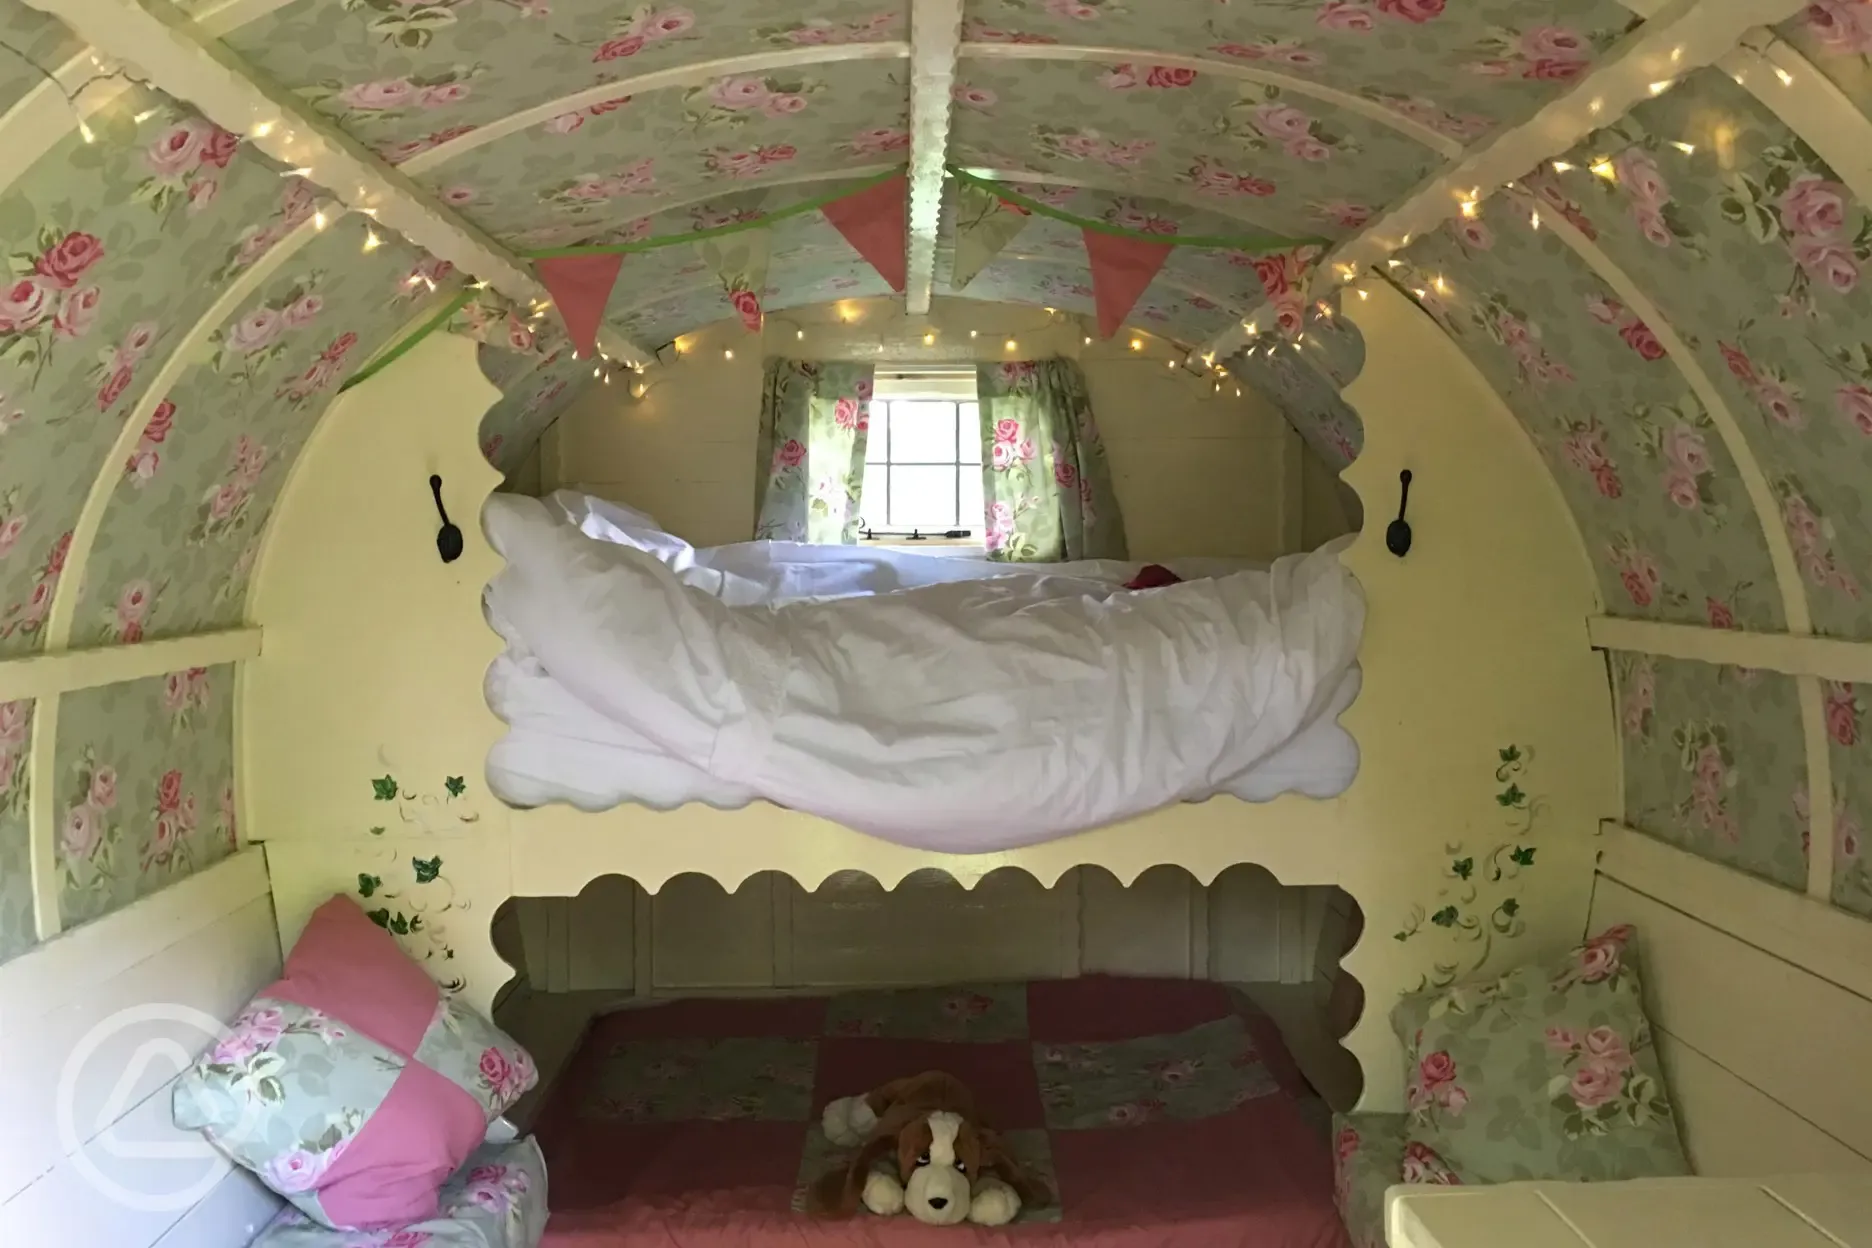 Our gypsy van has a four foot wide full length bed (and if you chose to bring the kids- there is space for two underneath!)